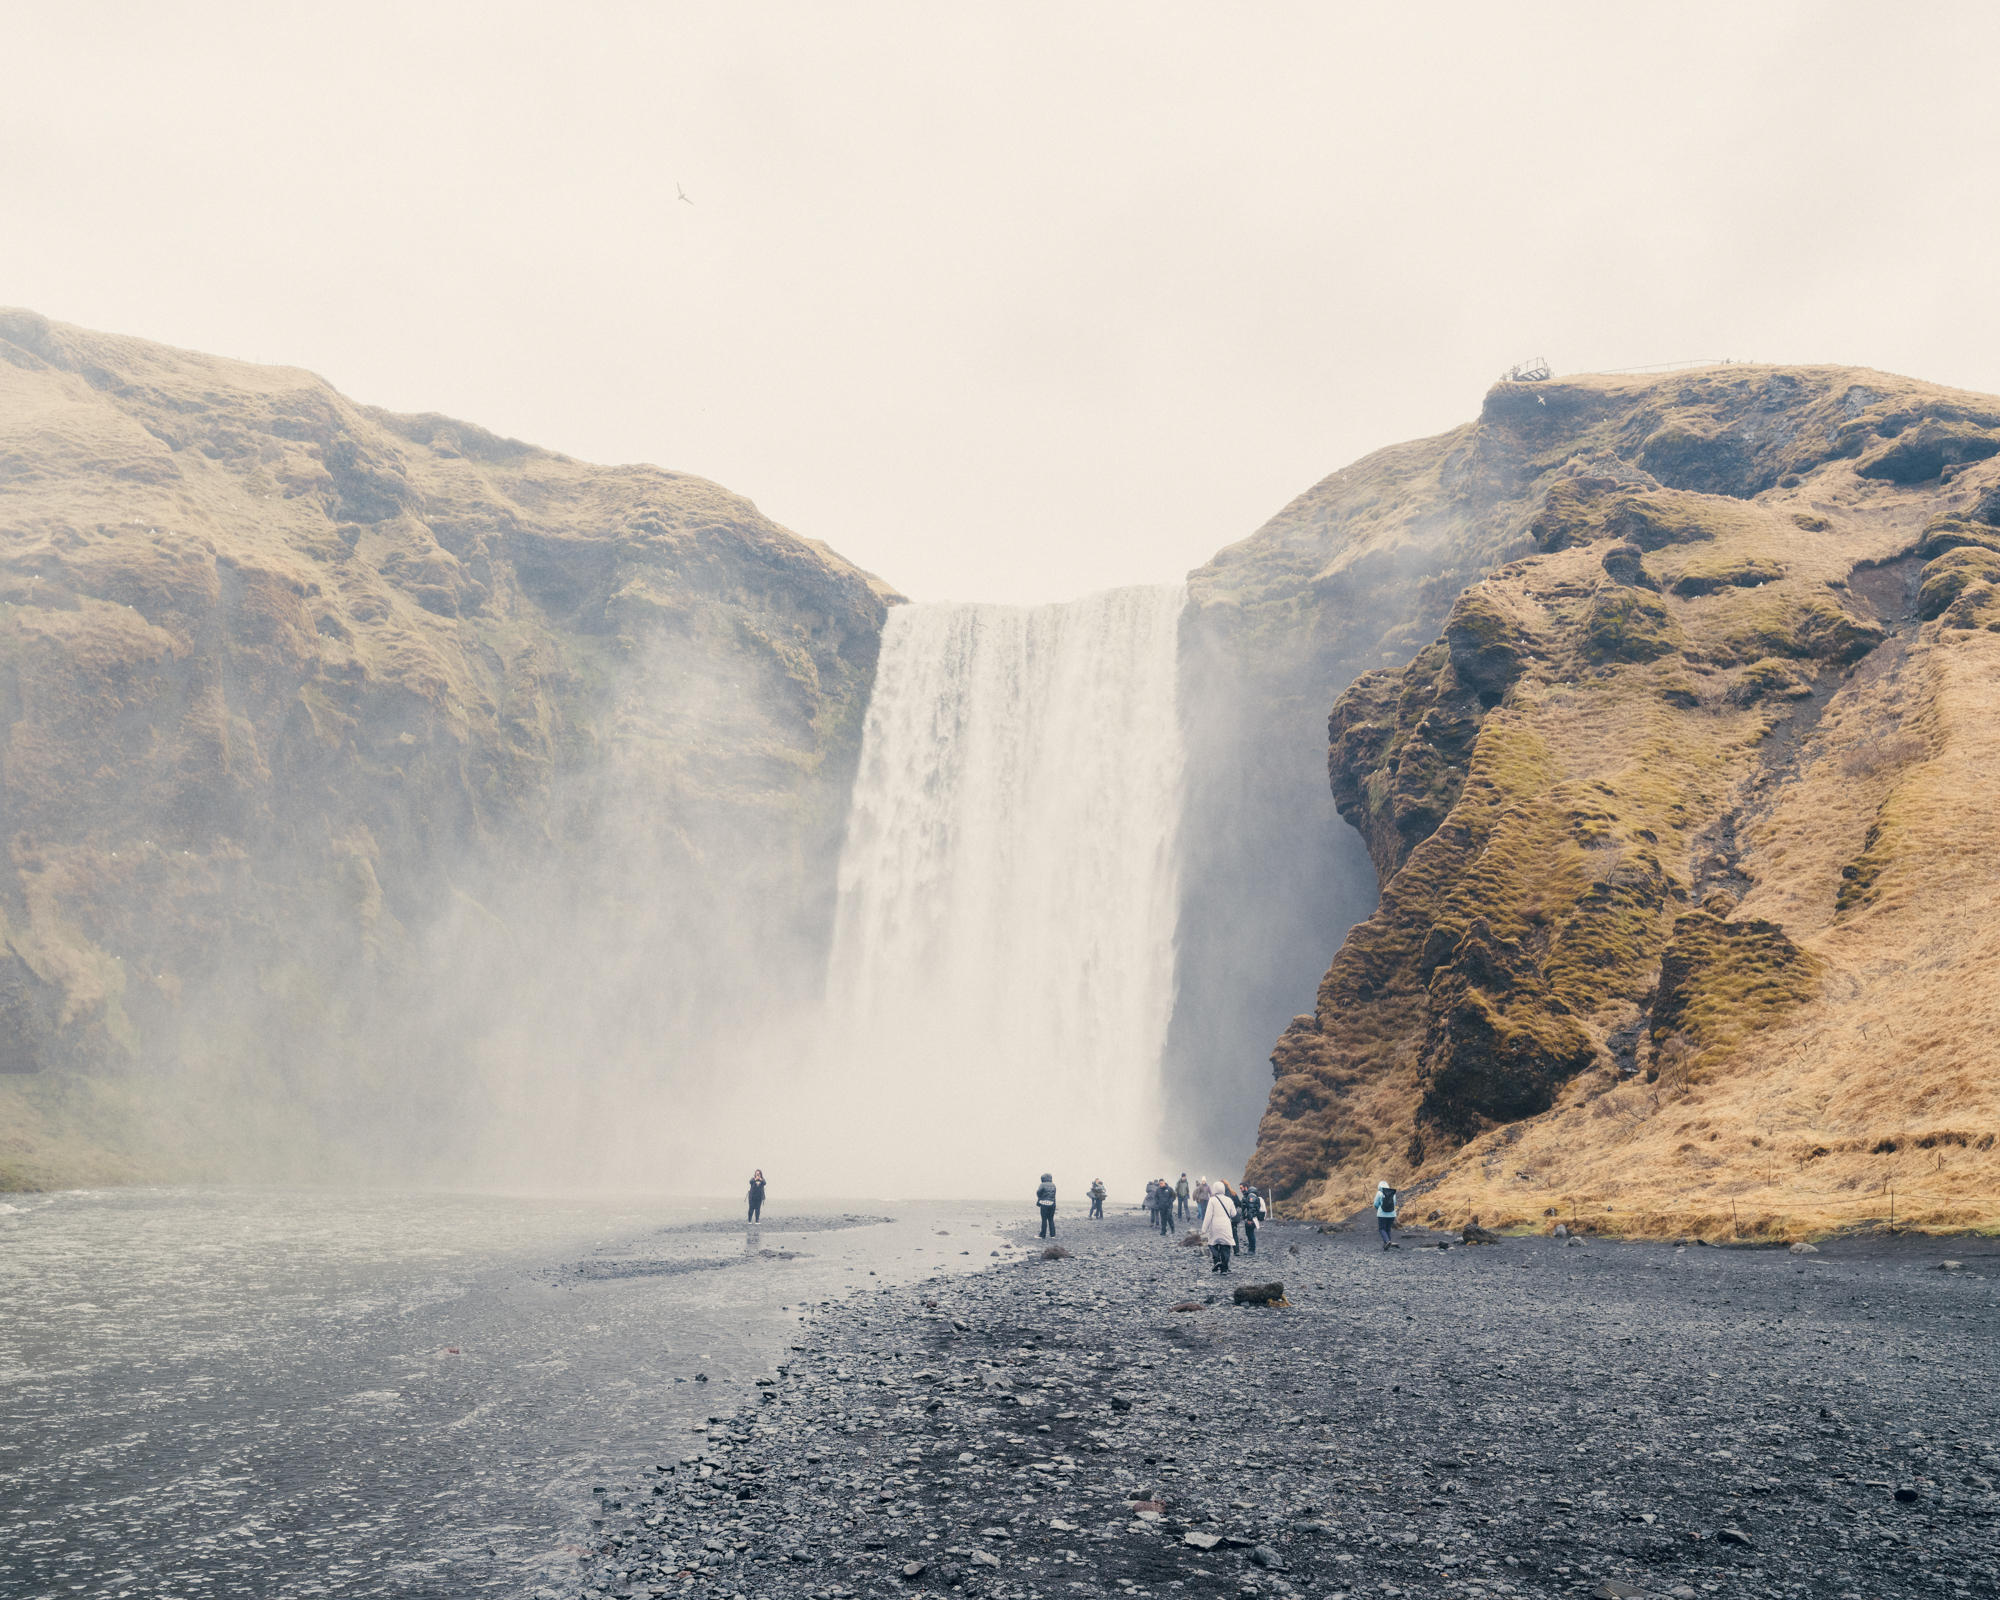 Crowded Skógafoss Waterfall: Popular attraction teeming with visitors in Iceland